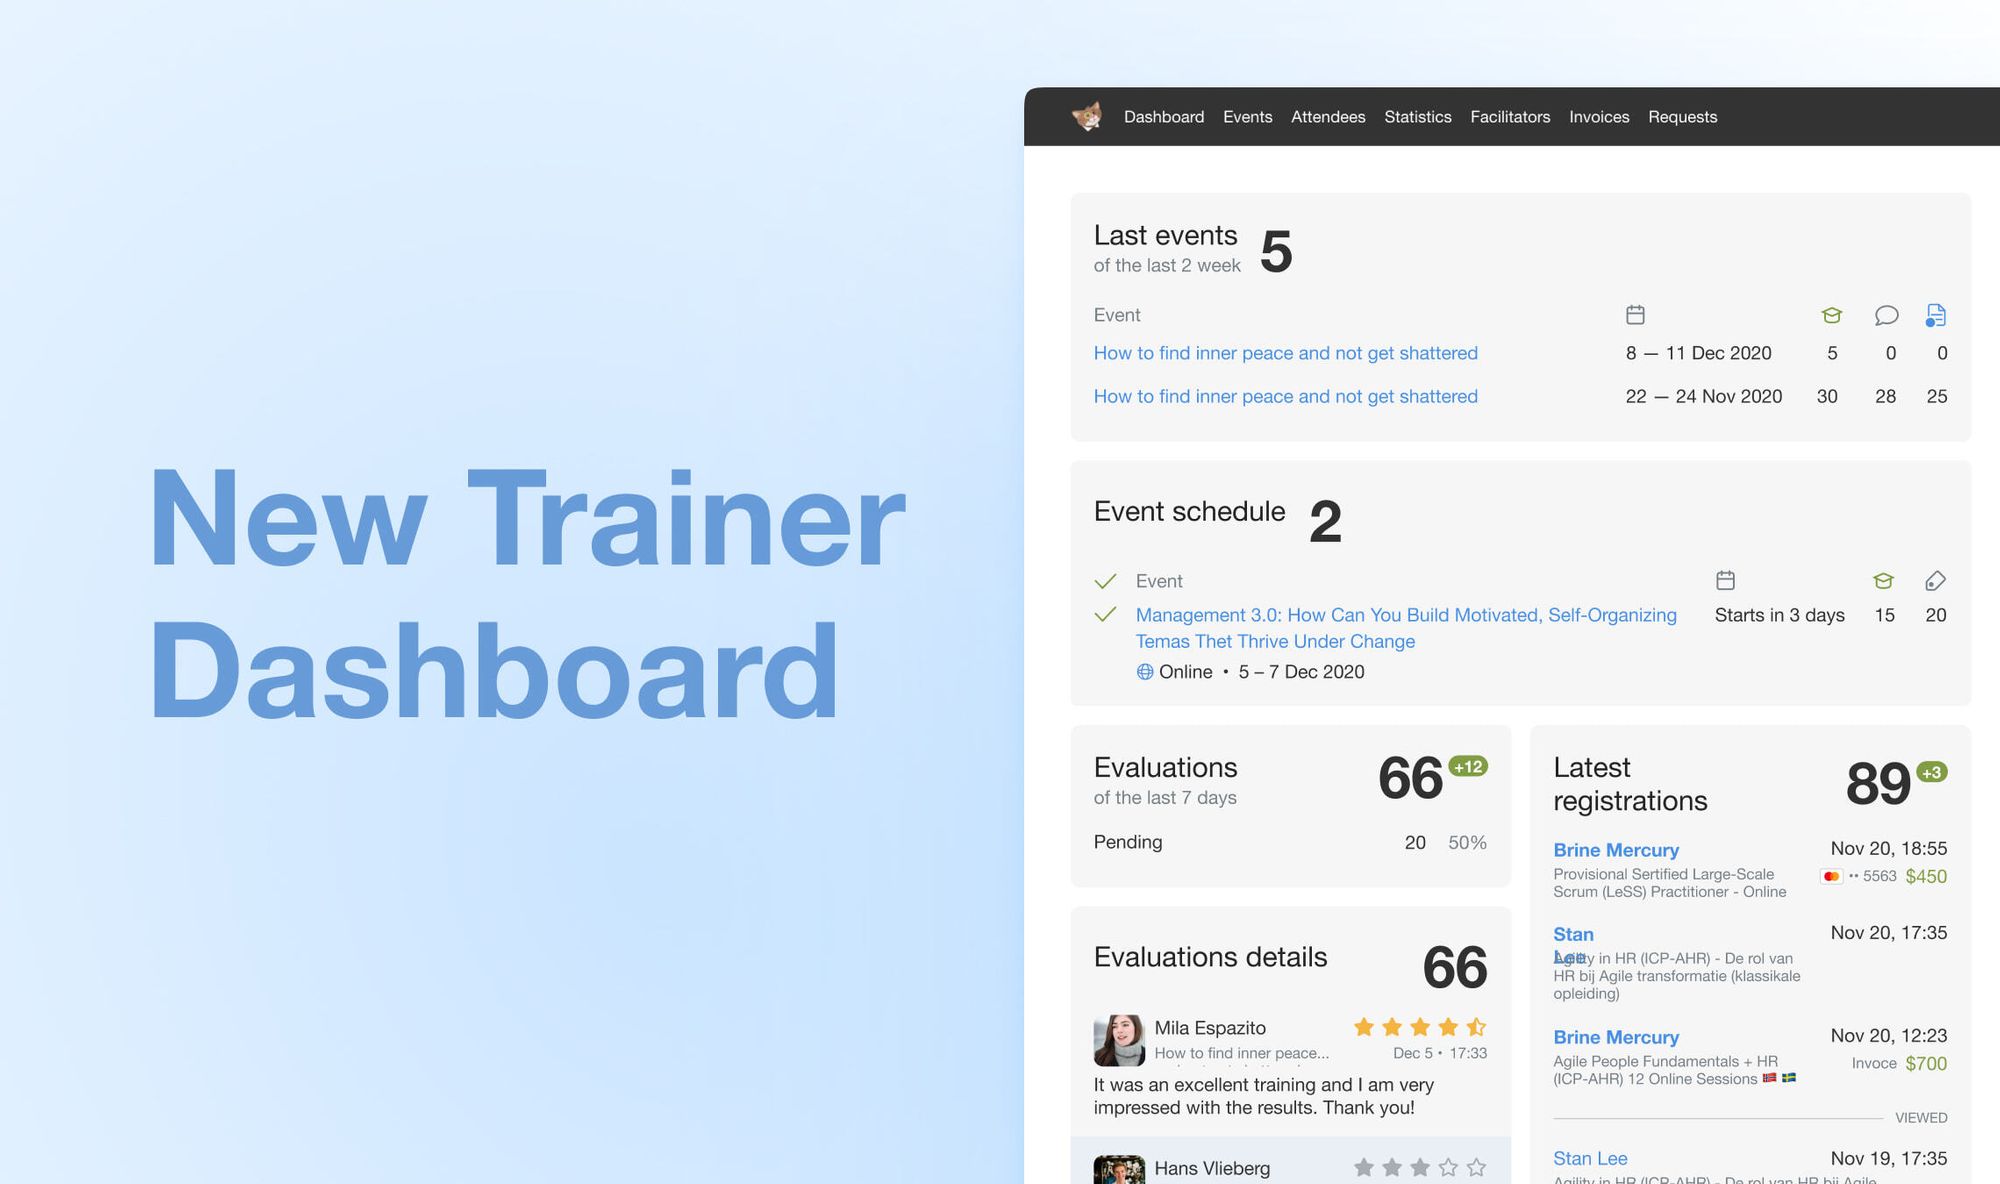 Introducing new trainer dashboard